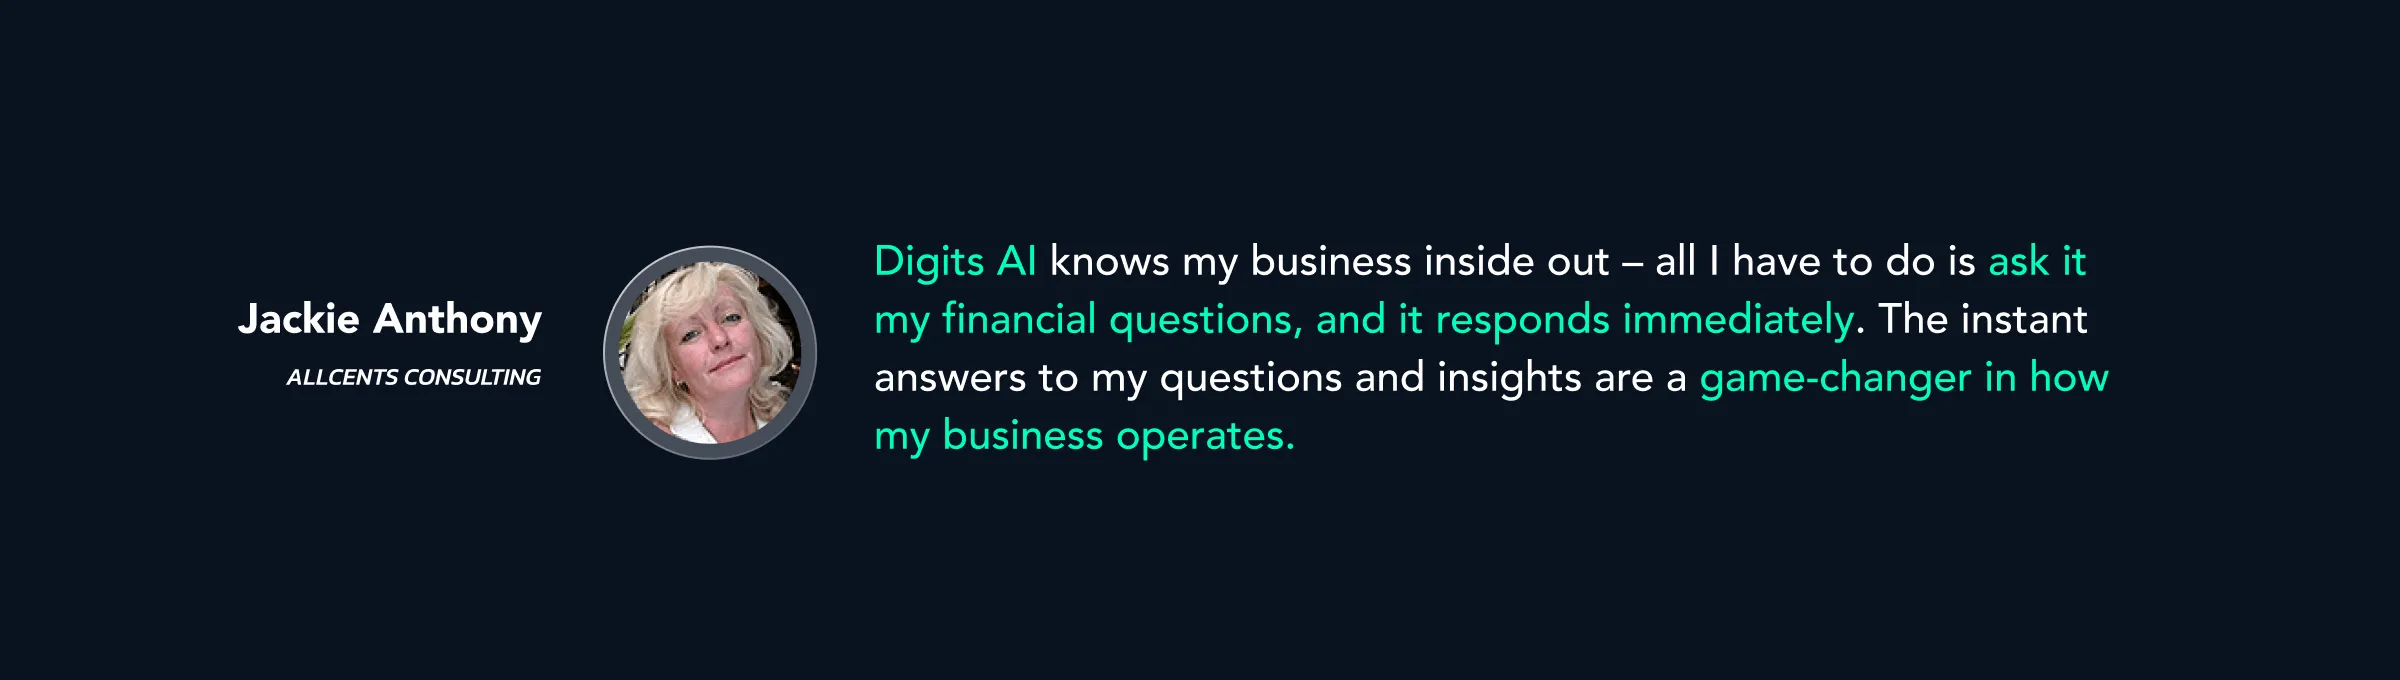 Quote from Digits customers talking about the impact of Digits AI